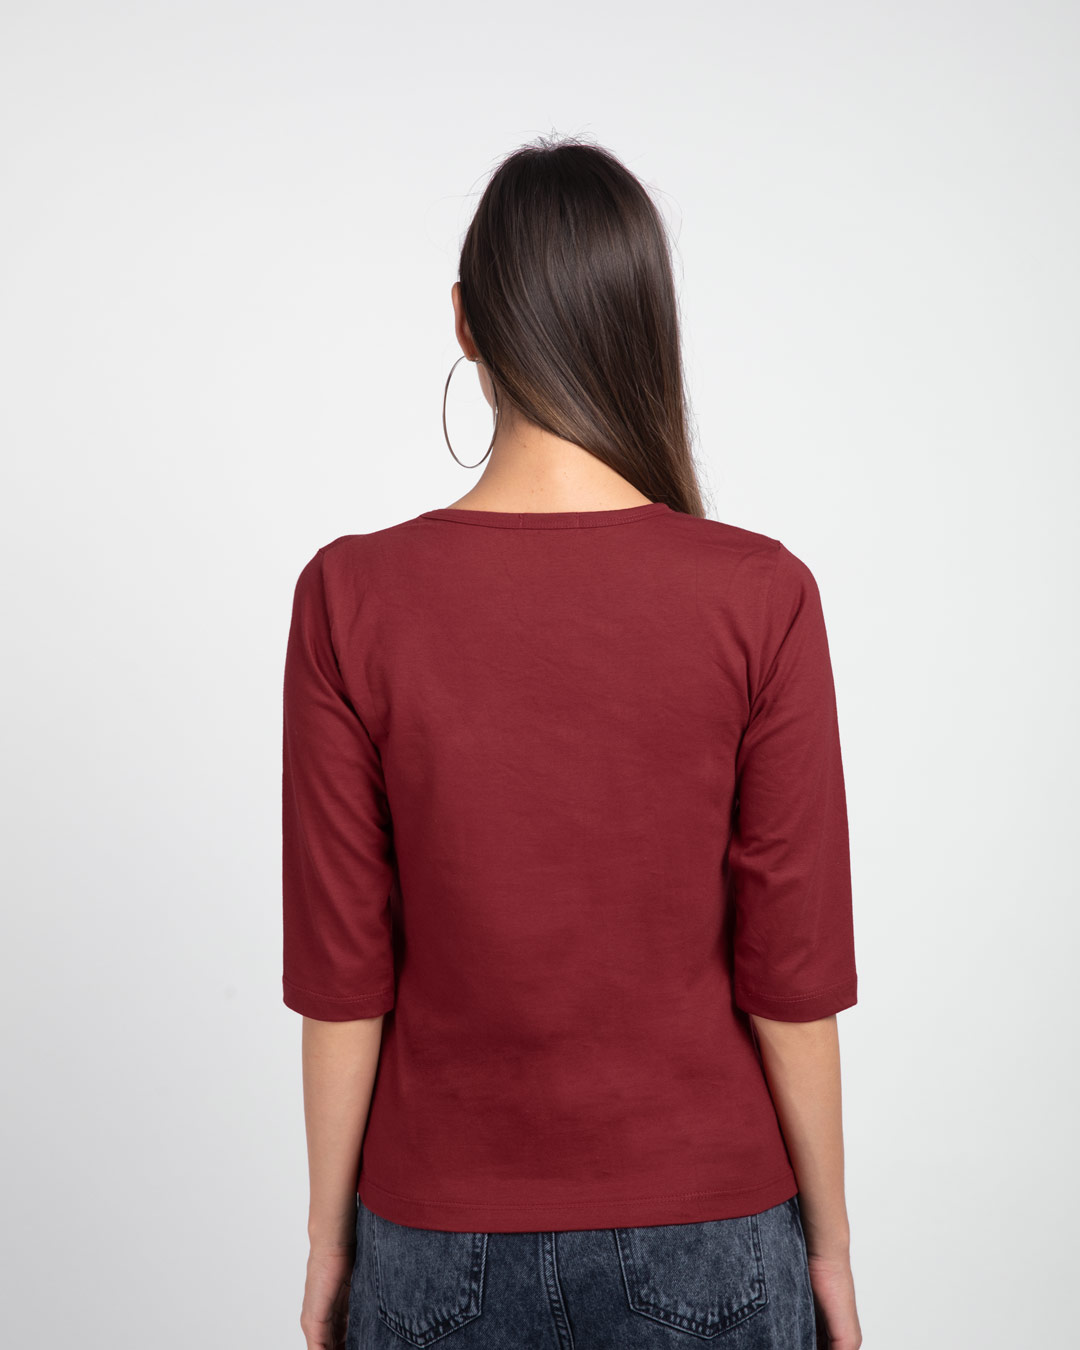 Shop Working From Home Round Neck 3/4 Sleeve T-Shirt Scarlet Red-Back